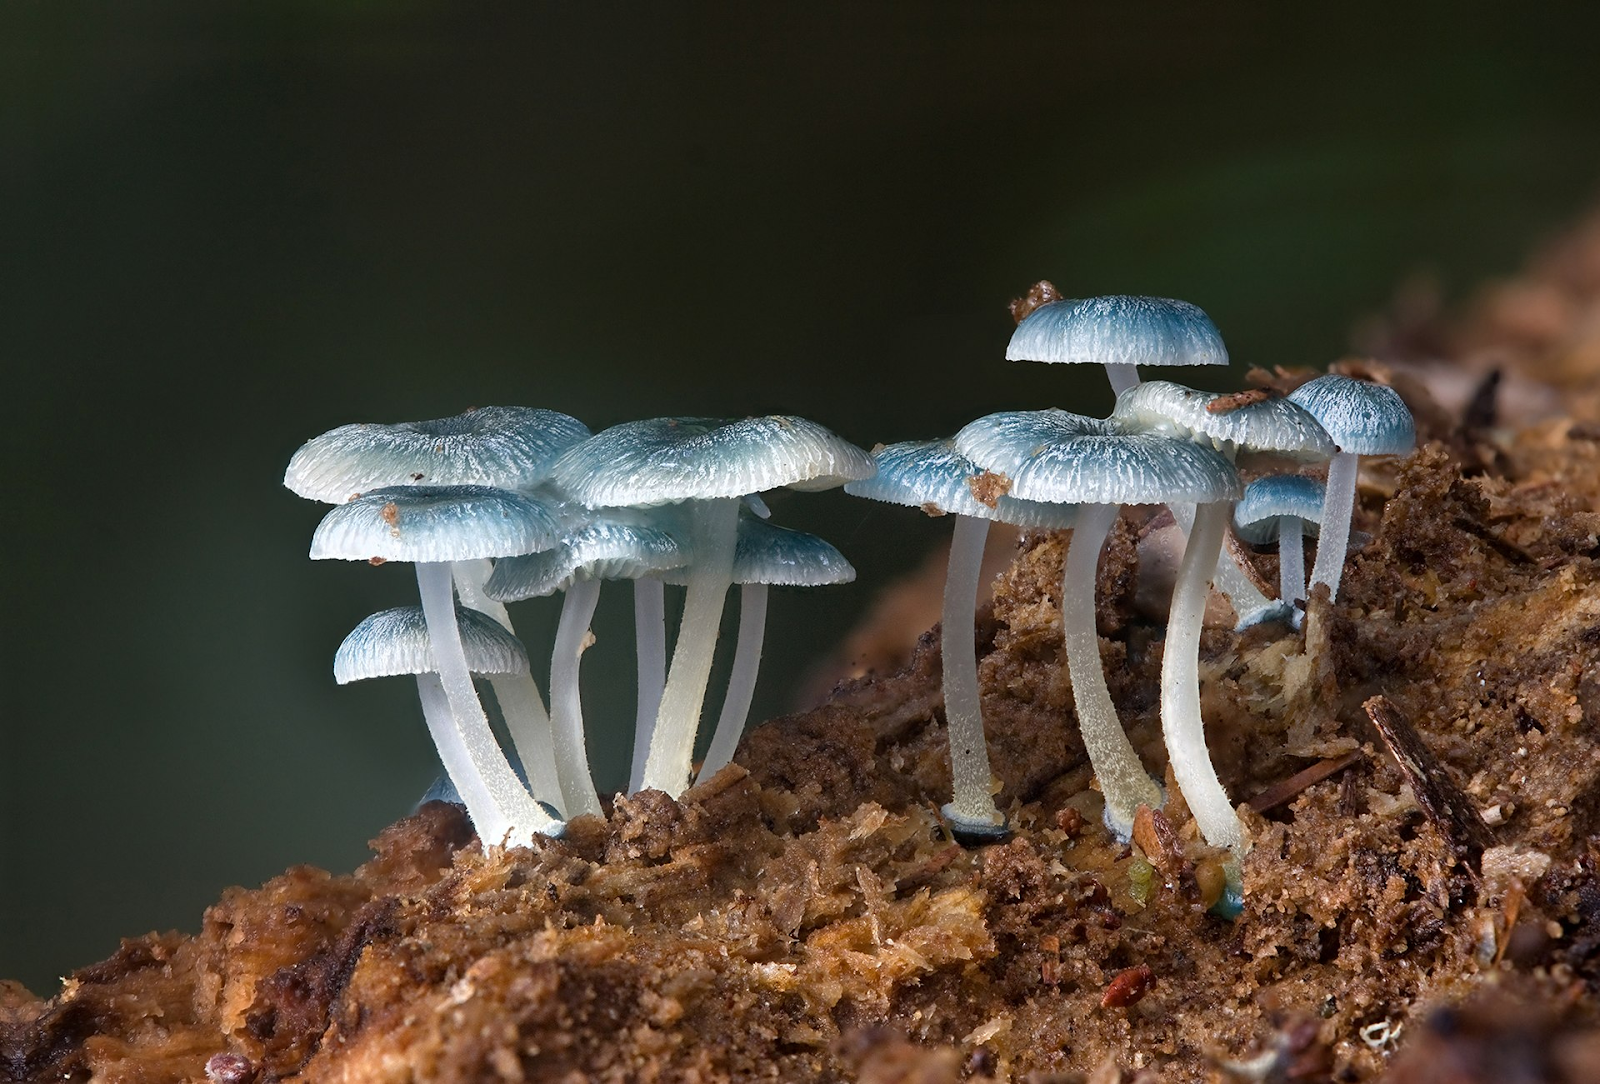 Three clumps of small mushrooms that are light blue on the caps and white elsewhere are shown coming out of some soil.